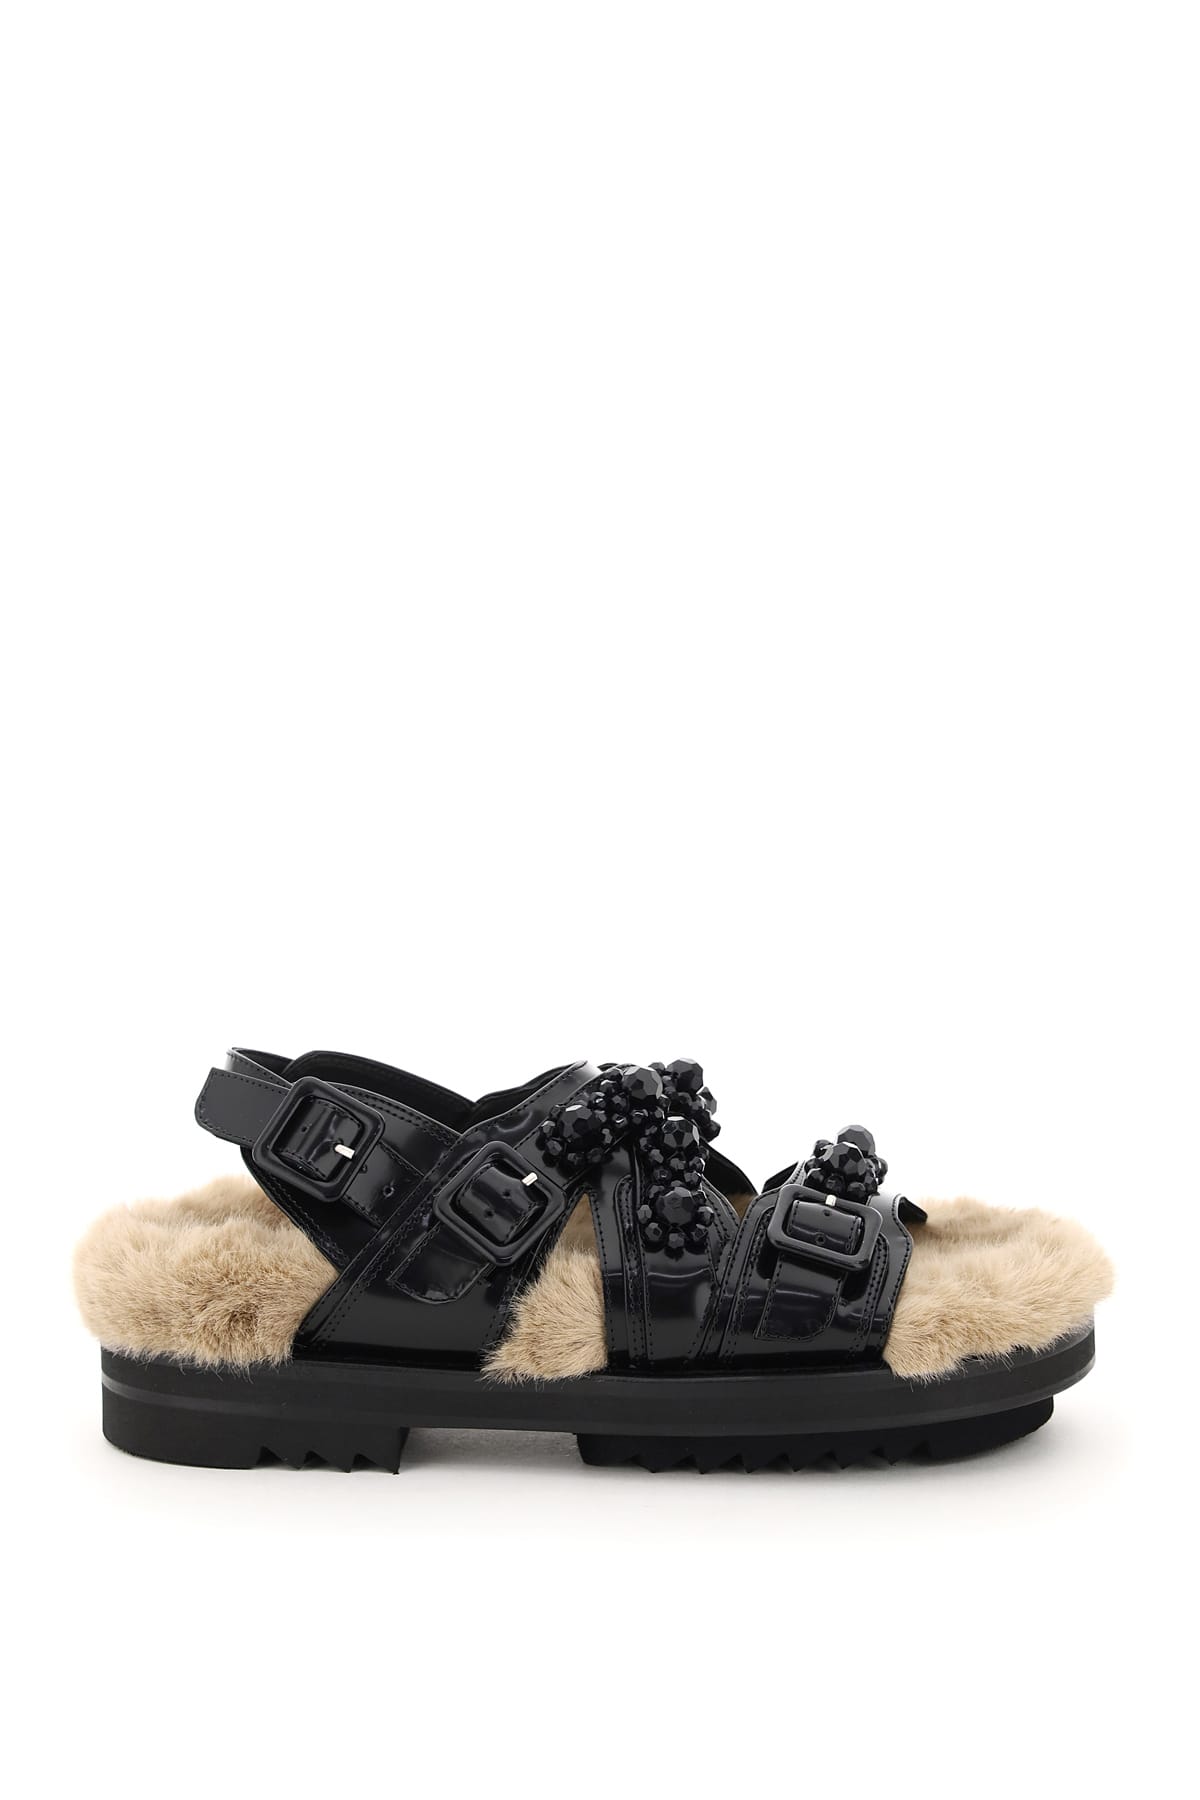 Simone Rocha Embellished Sandals With Faux Fur